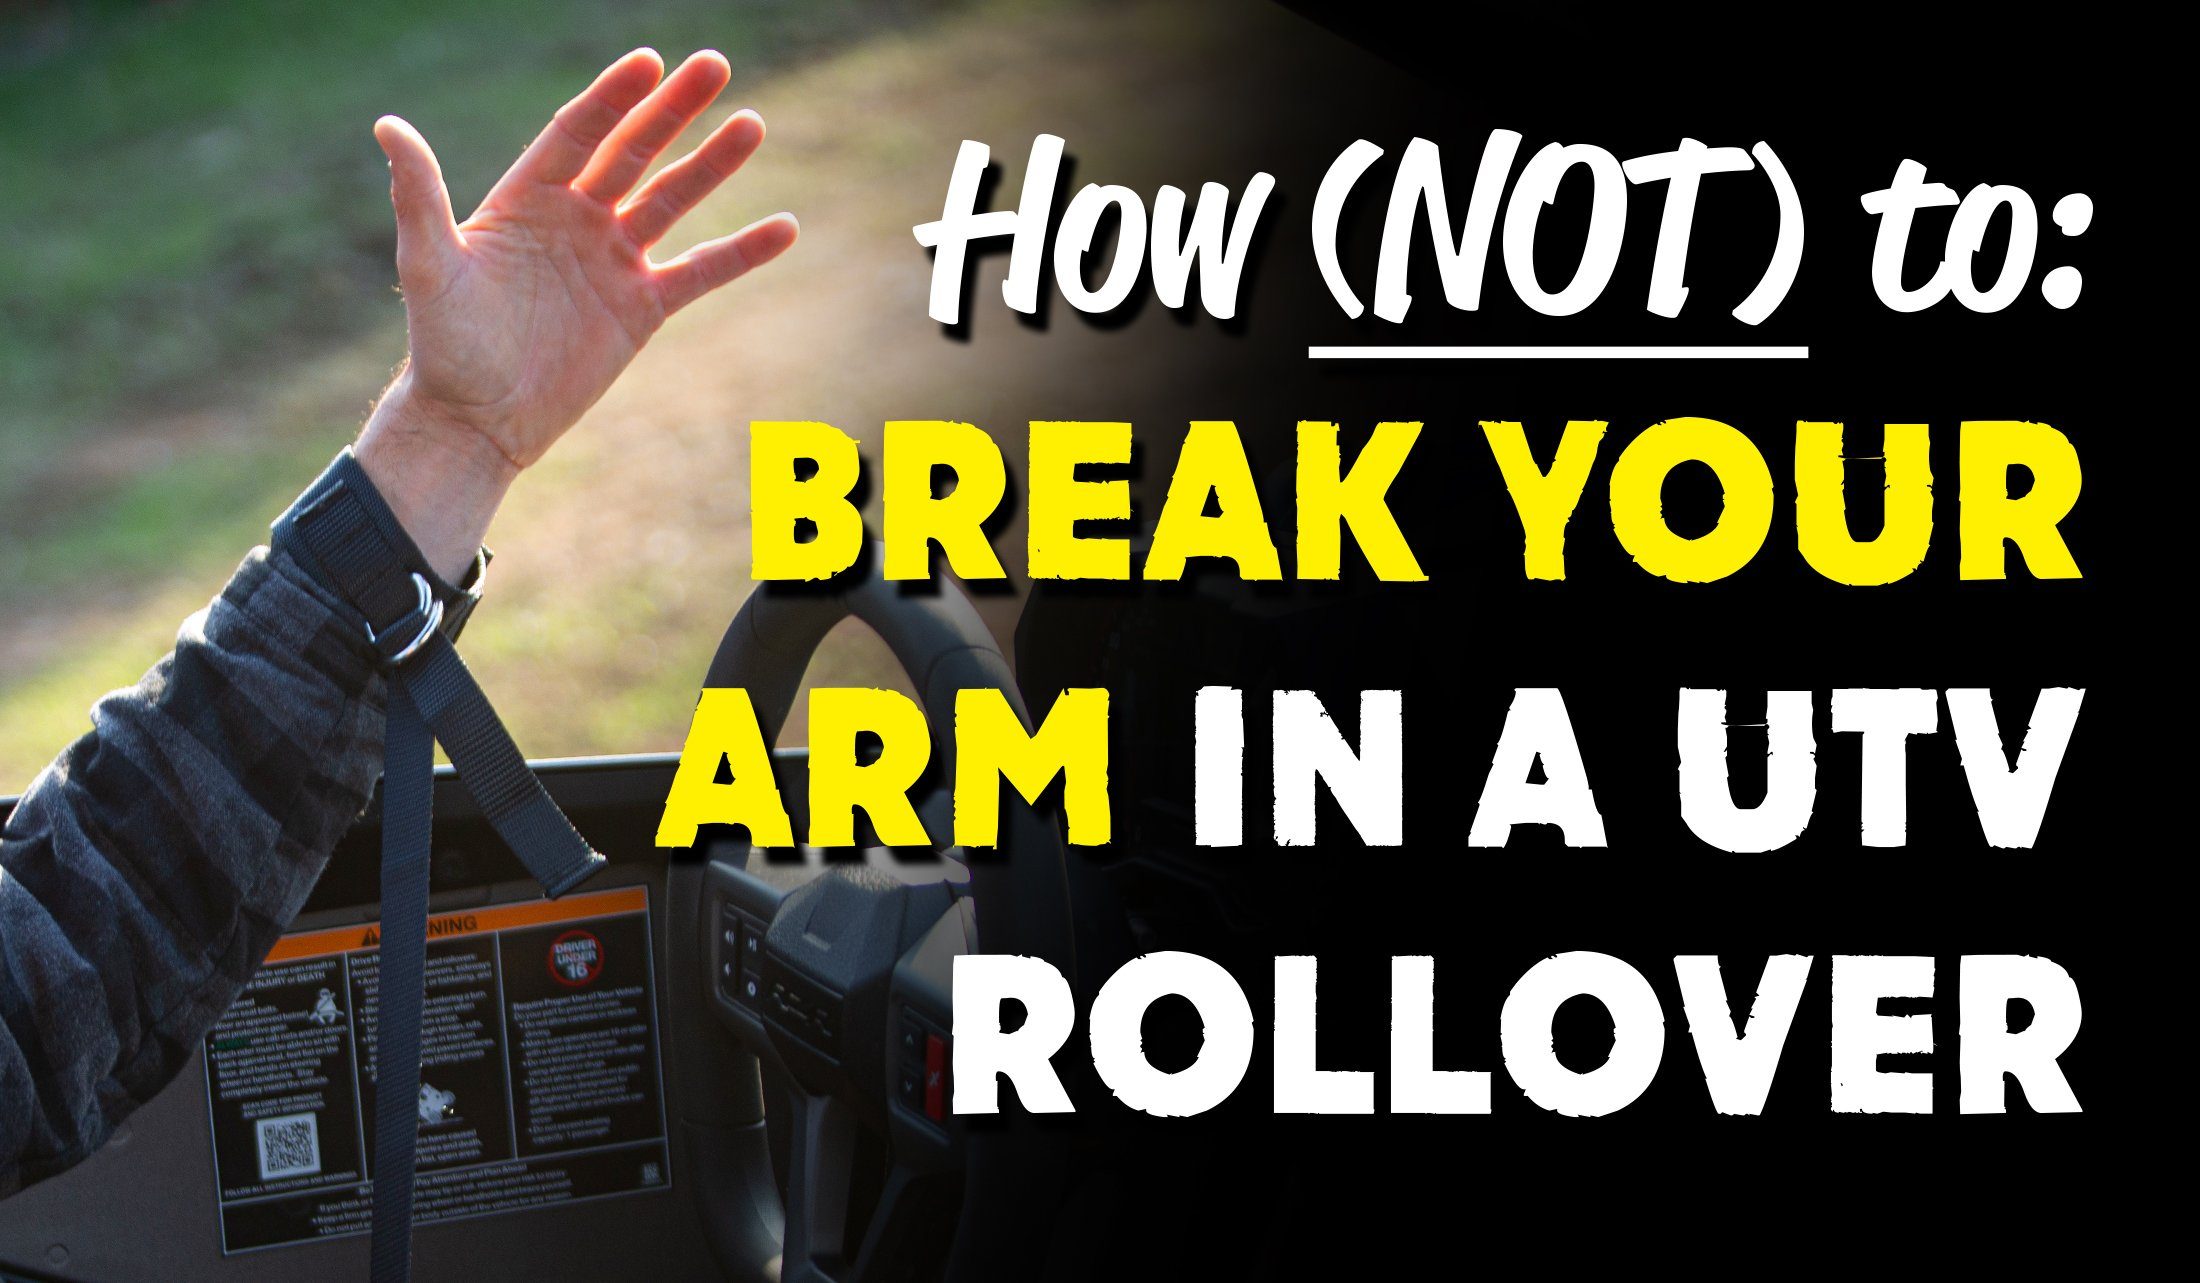 How (not) to break your arm or hand in a UTV rollover!